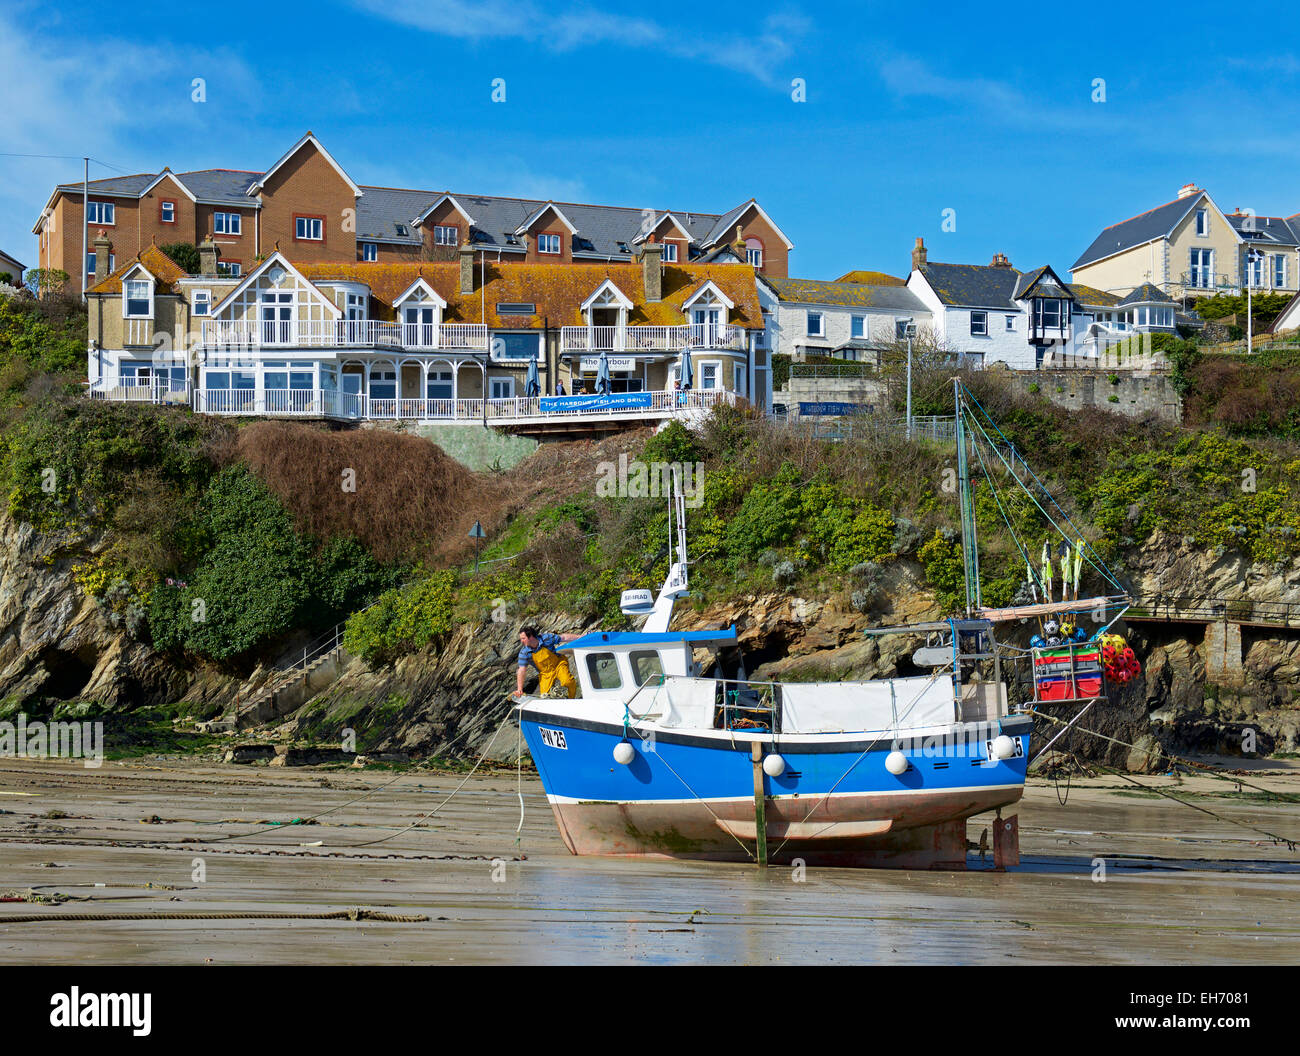 Man on fishing boat, the harbour at low tide, Newquay, Cornwall, England UK Stock Photo